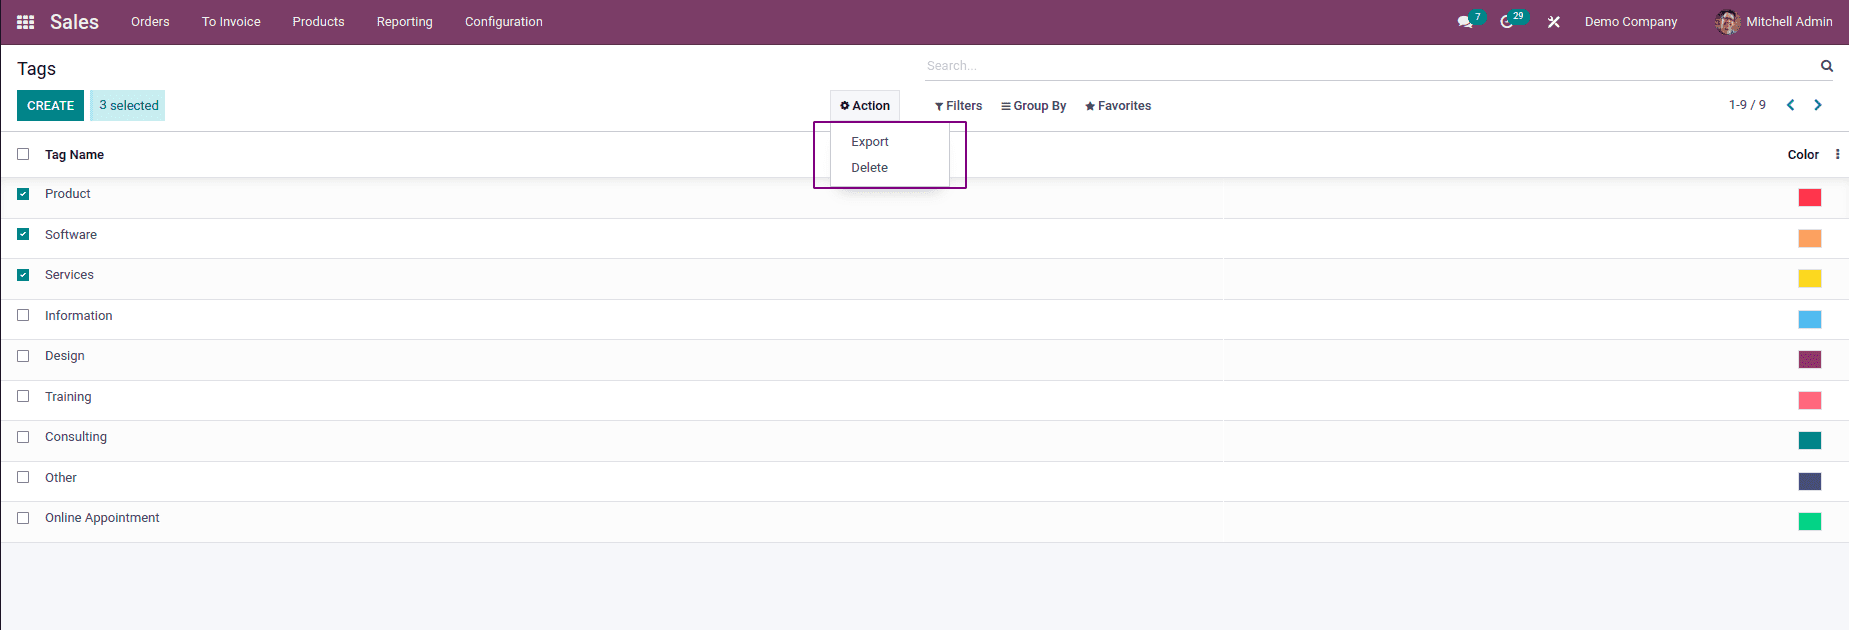 how-to-set-up-tags-in-odoo-15-sales-app-5-cybrosys